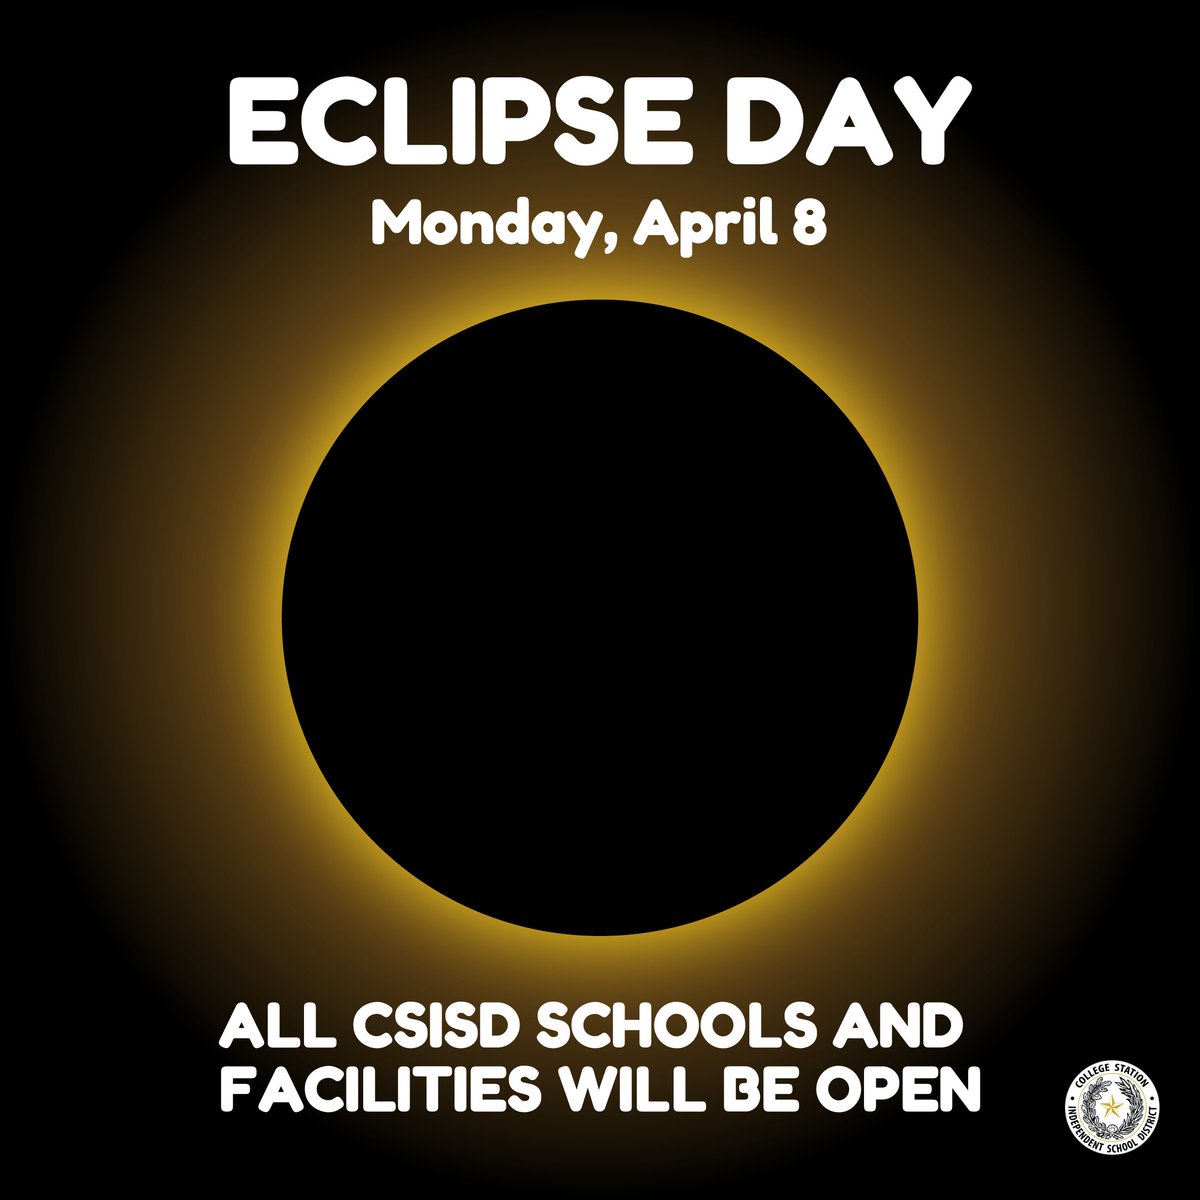 Reminder: All CSISD schools and facilities will be open and operate as normal on Eclipse Day – Monday, April 8. We look forward to learning about and experiencing this incredible phenomenon with our students and staff!☀️ #SolarEclipse2024